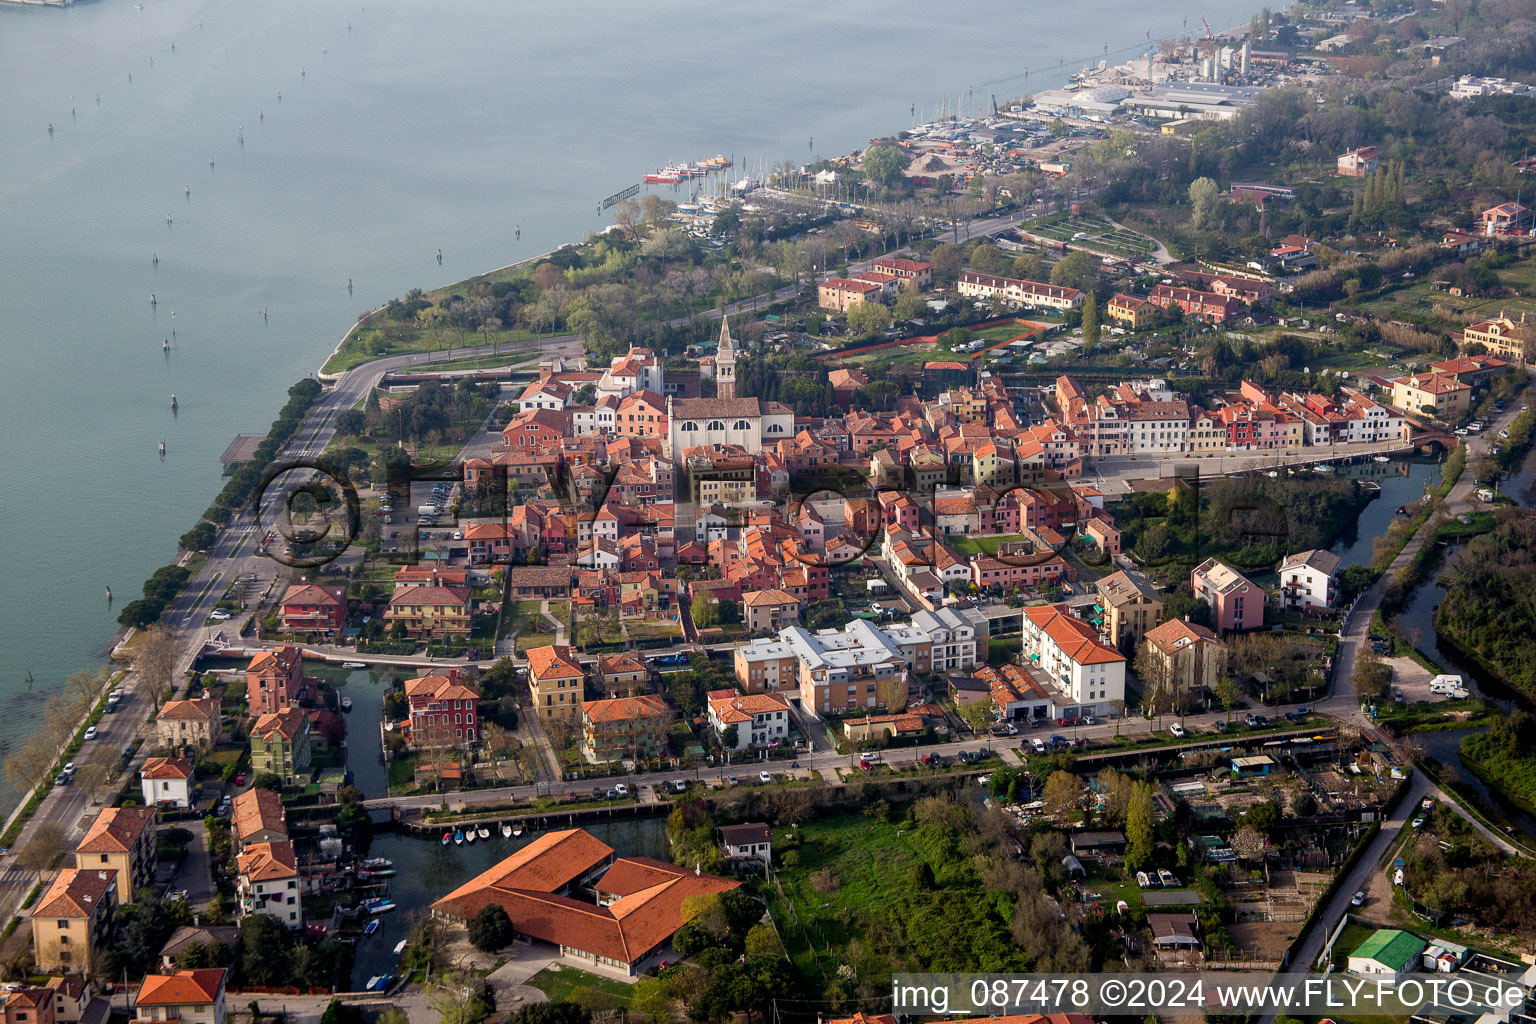 Town View of the streets and houses of the residential areas in Malamocco in Veneto, Italy